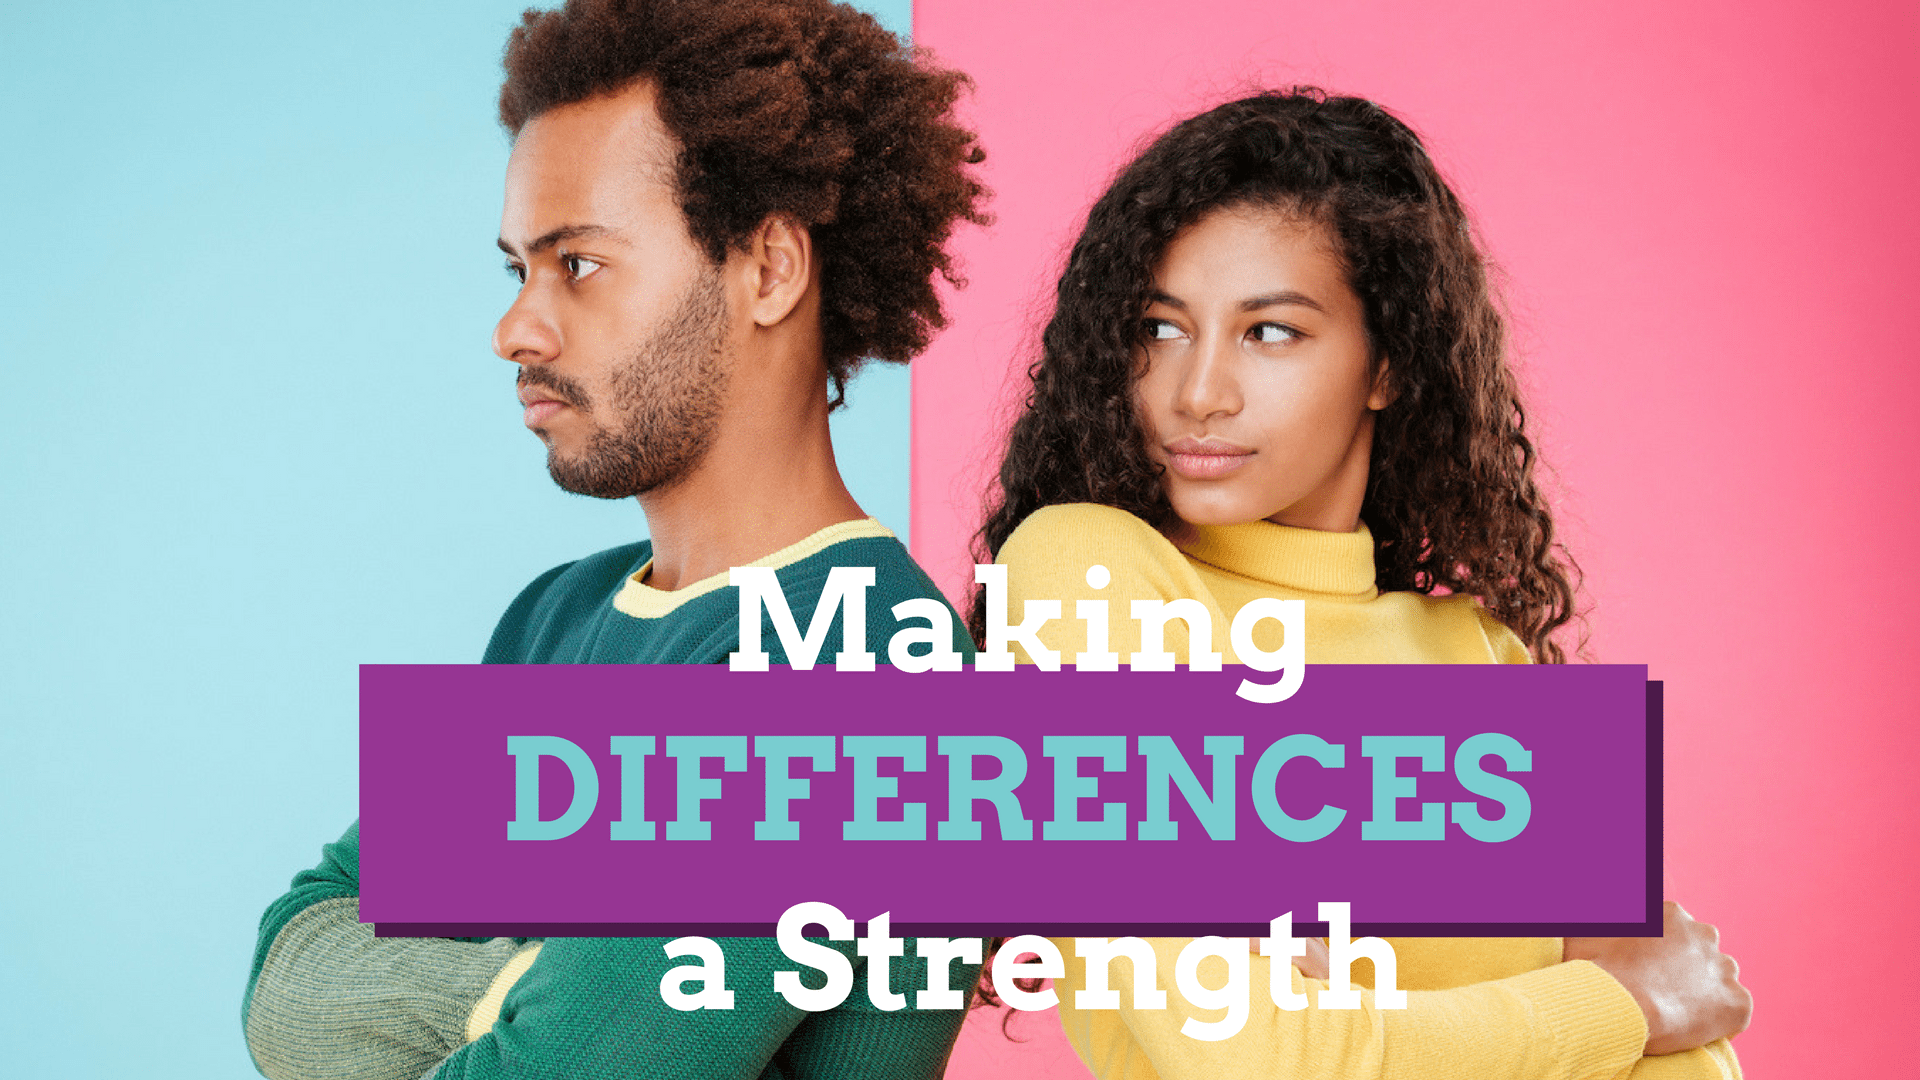 making differences a strength graphicstock-sad-unhappy-_S_6PaSUnx copy